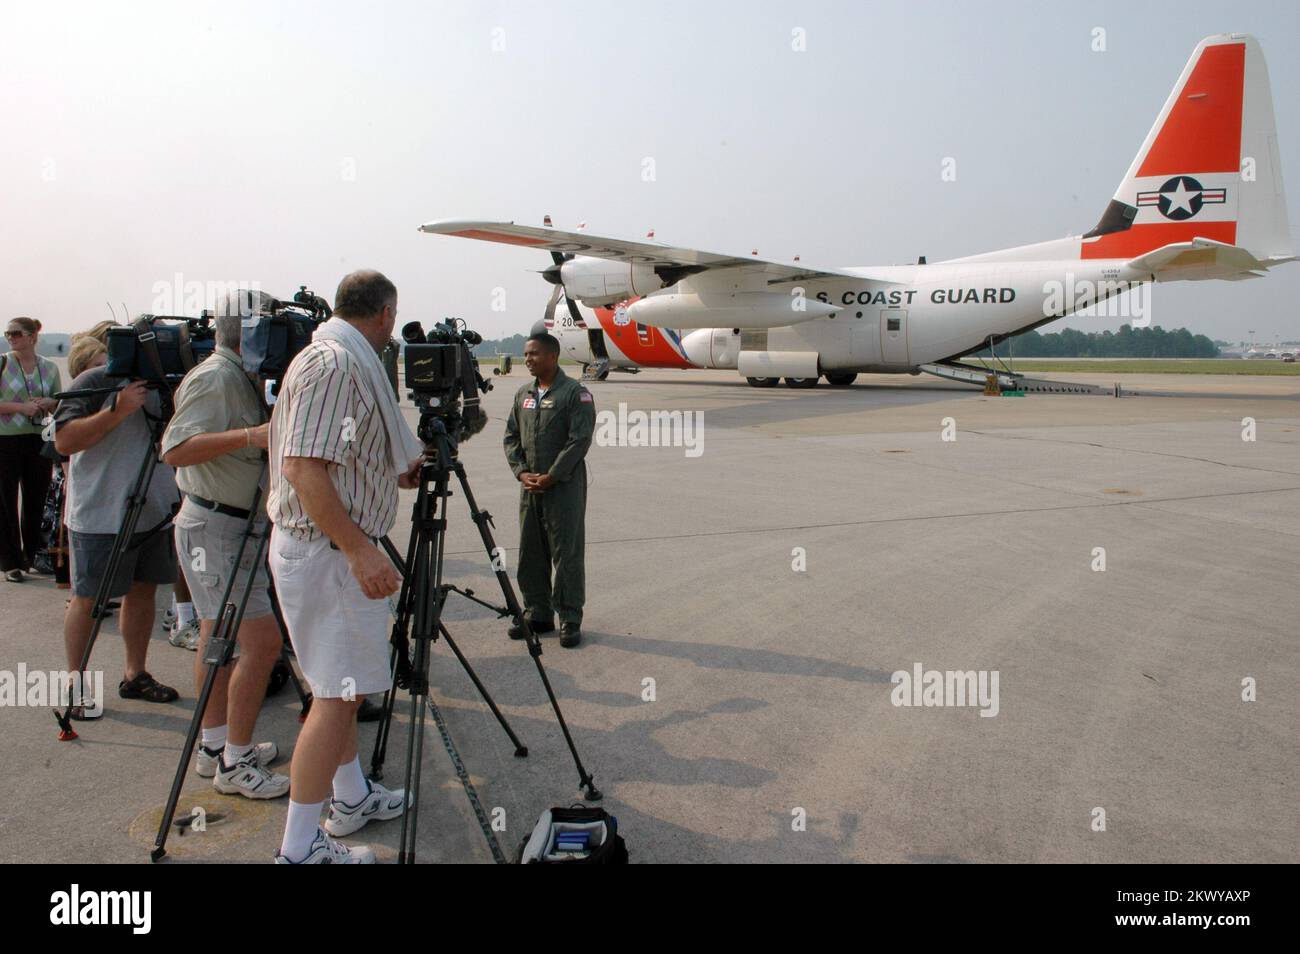 Marietta, GA, August 16, 2007   U.S. Coast Guard Pilot Lt. Jo'Andrew Cousins speaks to the press upon arrival to Dobbins Air Reserve Base. The Coast Guard is flying the FEMA Federal Incident Response Support Team (FIRSTeam) to Puerto Rico in advance of Hurricane Dean. Mark Wolfe/FEMA.. Photographs Relating to Disasters and Emergency Management Programs, Activities, and Officials Stock Photo